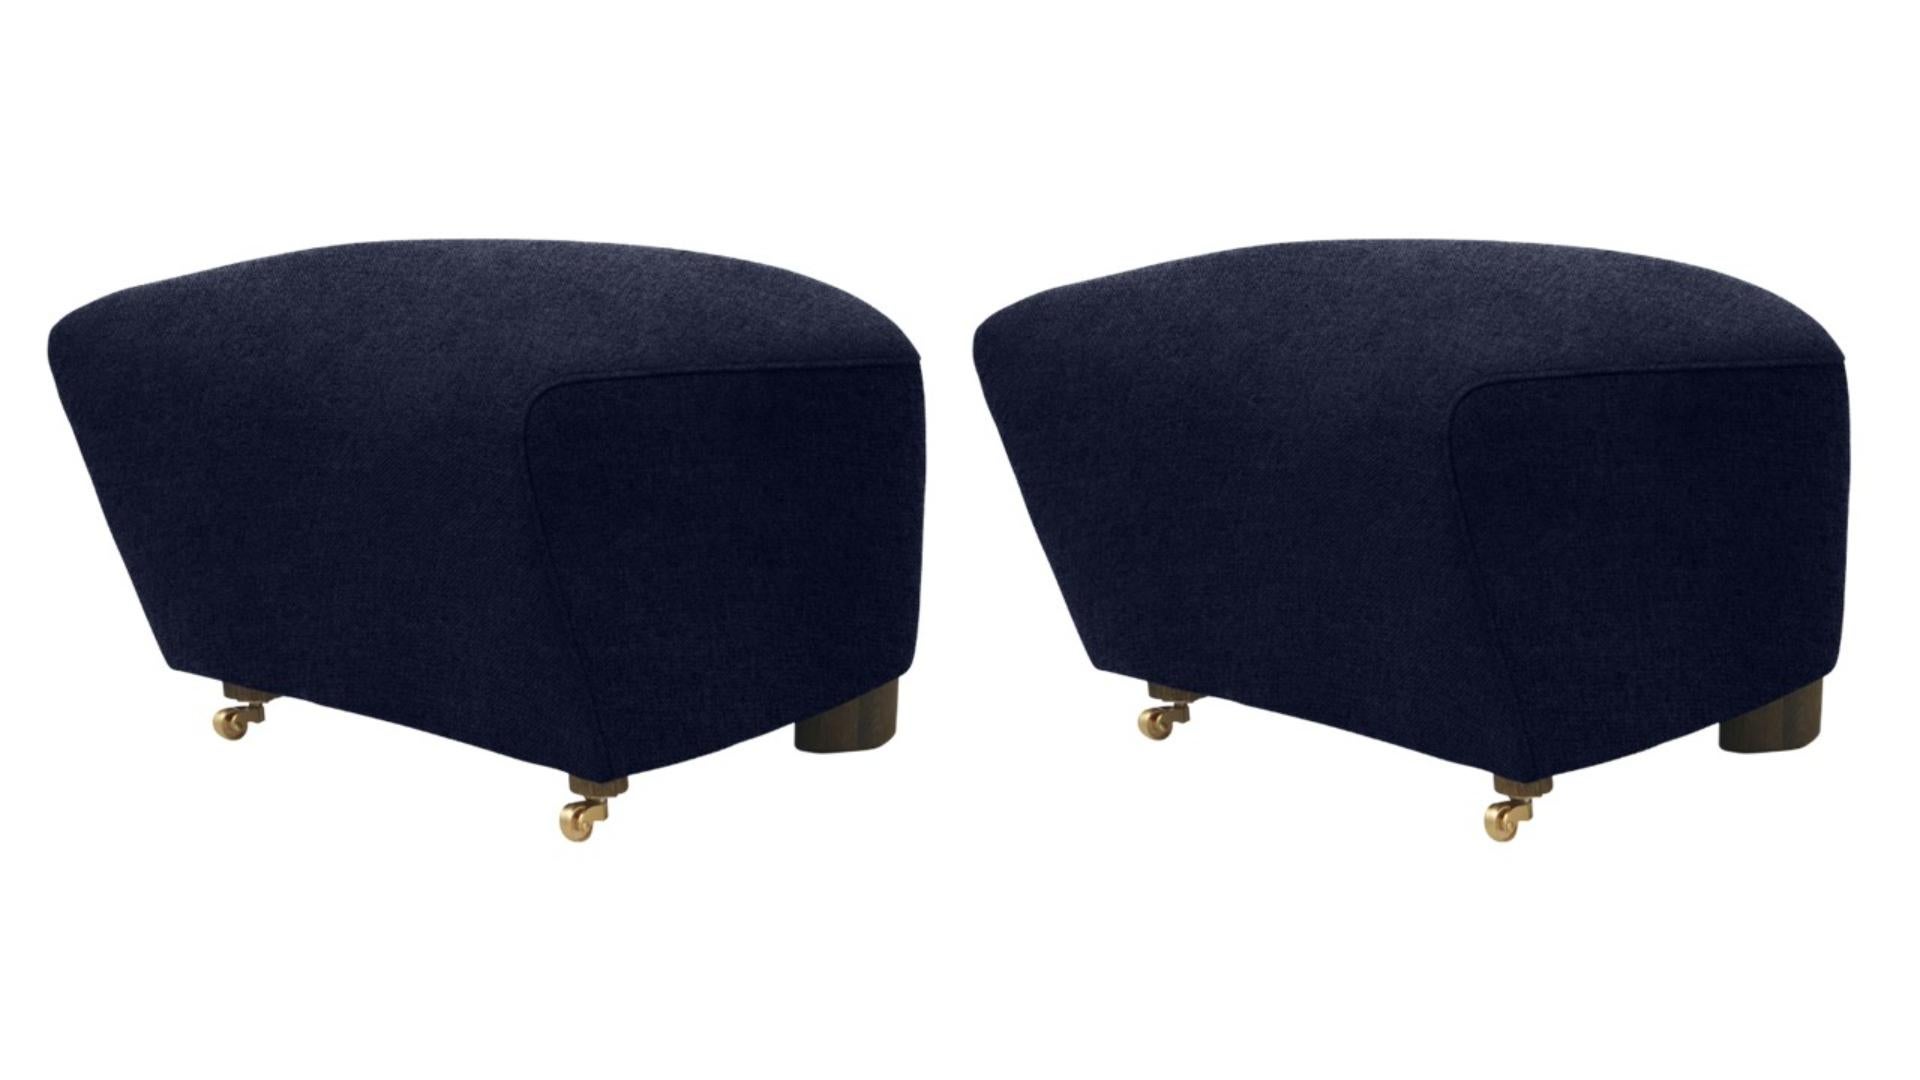 Set of 2 blue smoked oak Hallingdal the tired man footstools by Lassen
Dimensions: W 55 x D 53 x H 36 cm 
Materials: Textile

Flemming Lassen designed the overstuffed easy chair, The Tired Man, for The Copenhagen Cabinetmakers’ Guild Competition